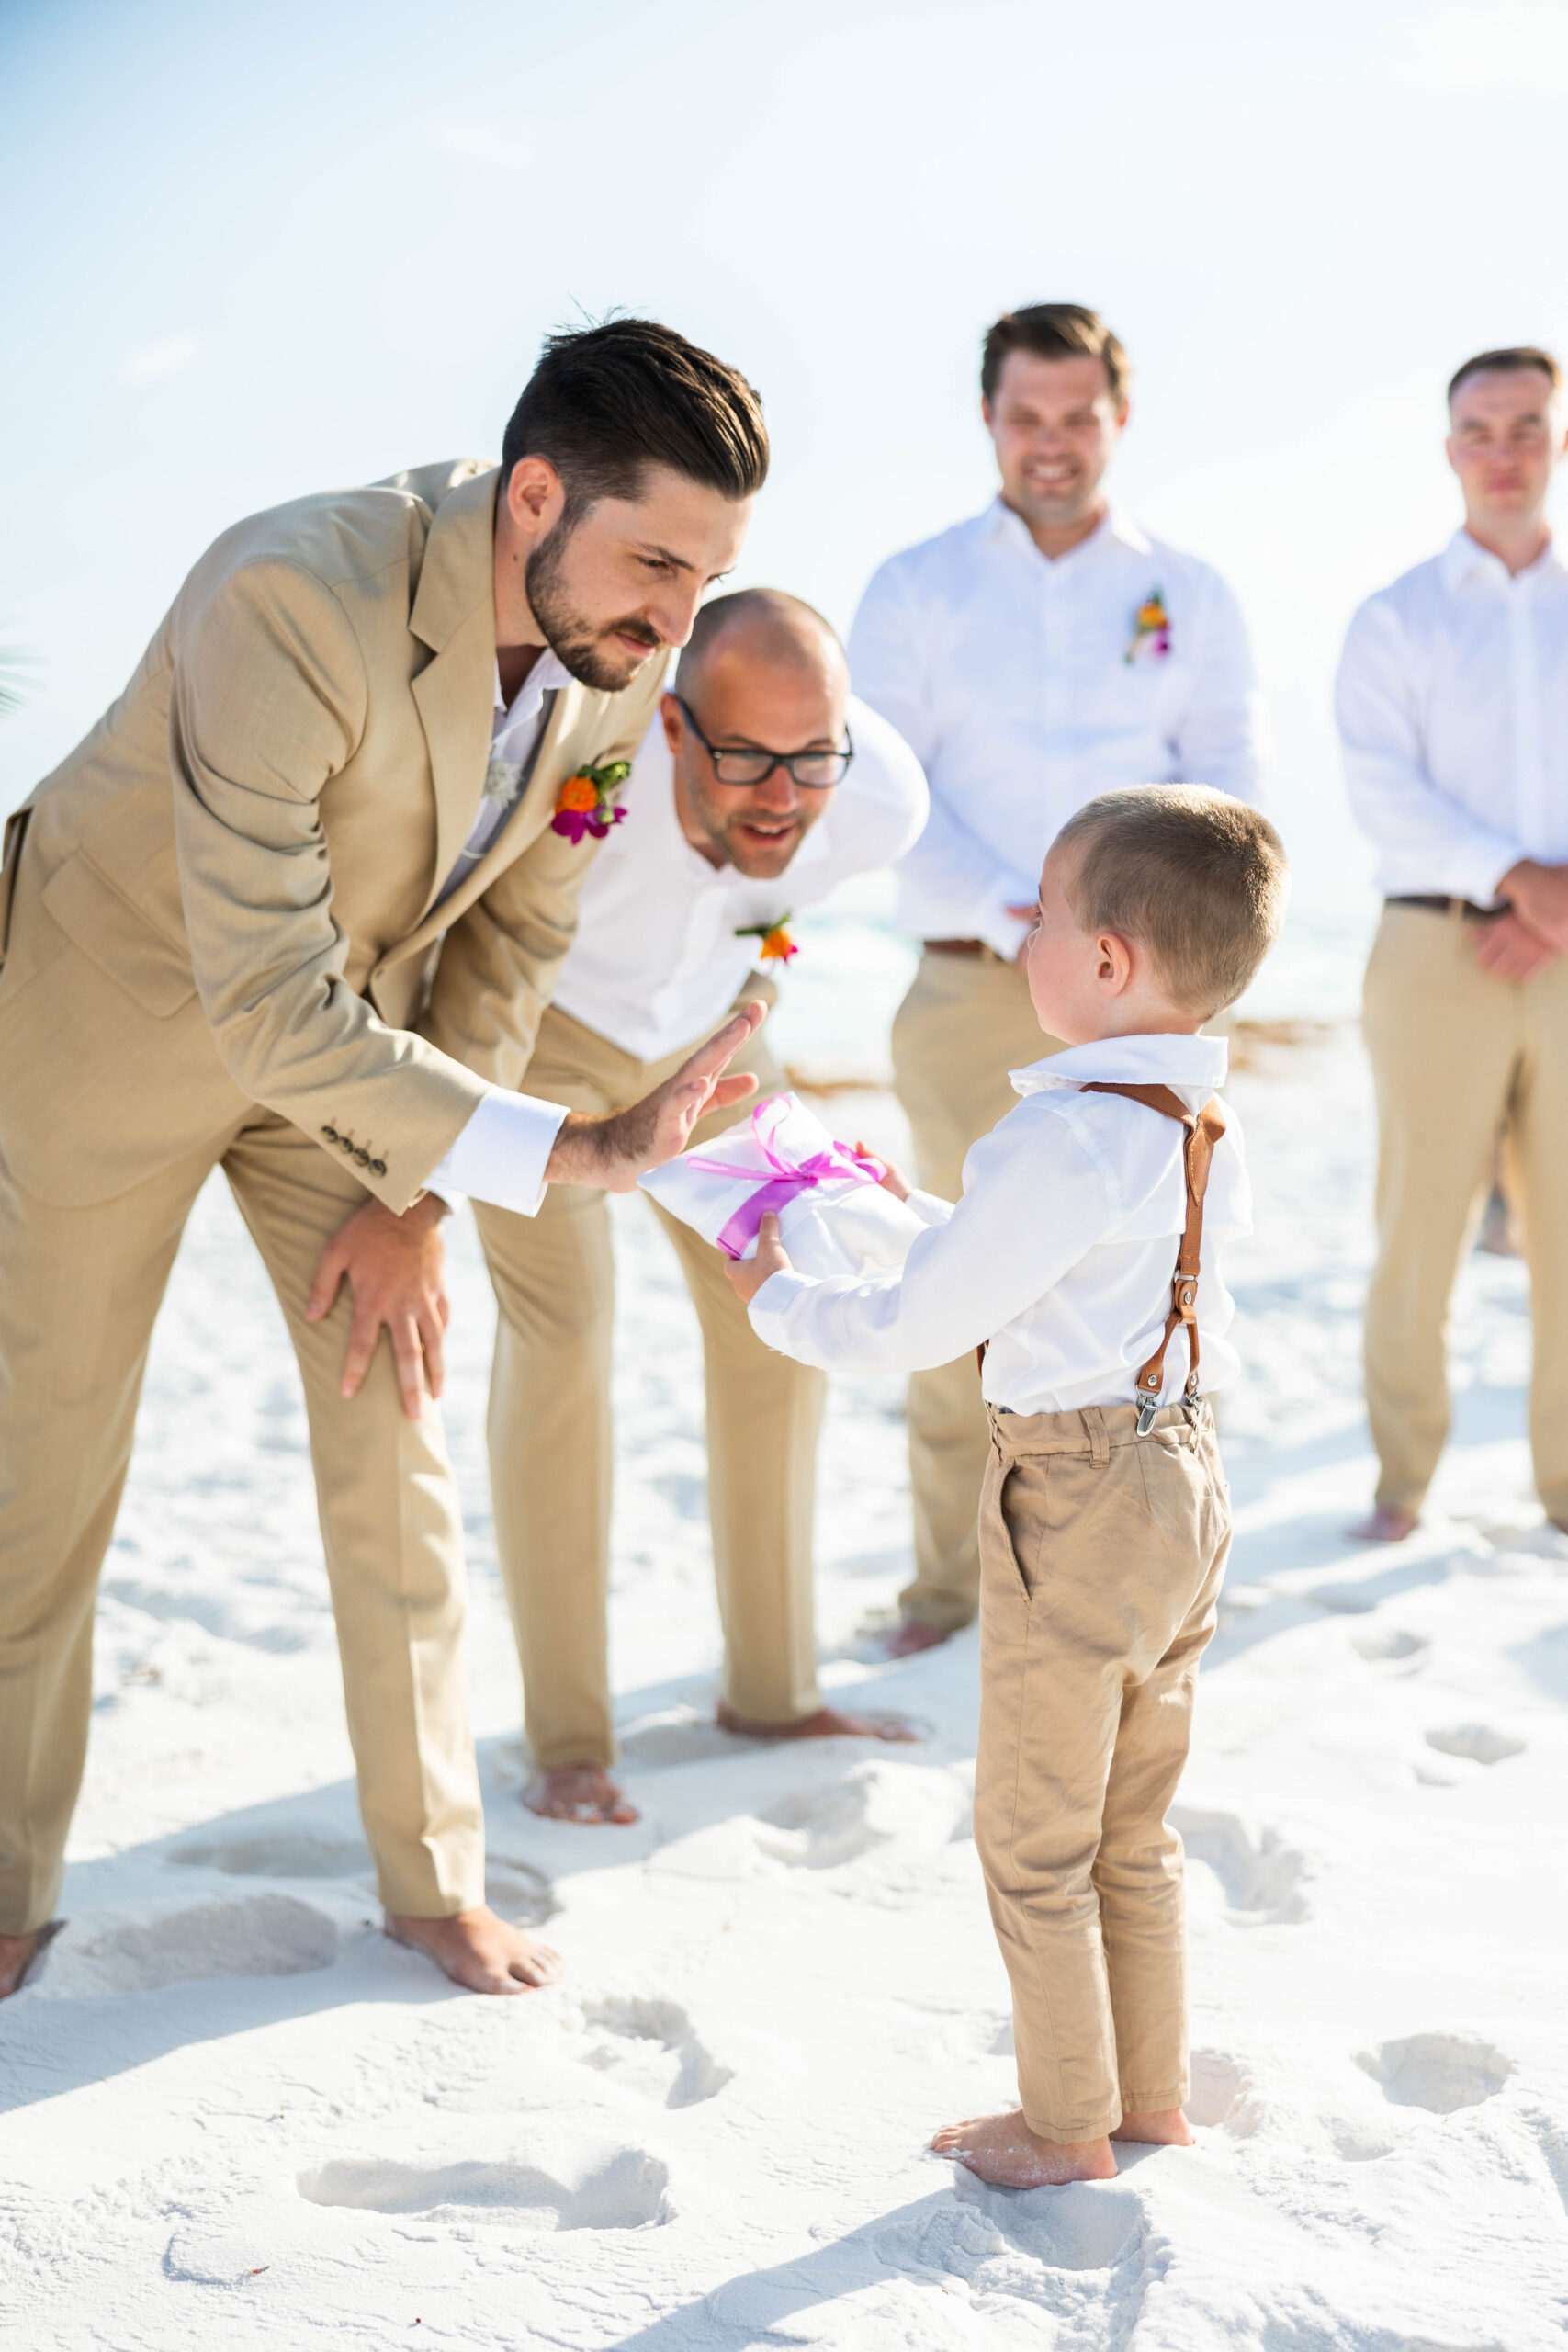 5 Ideas to Keep Kids Entertained at Your Wedding